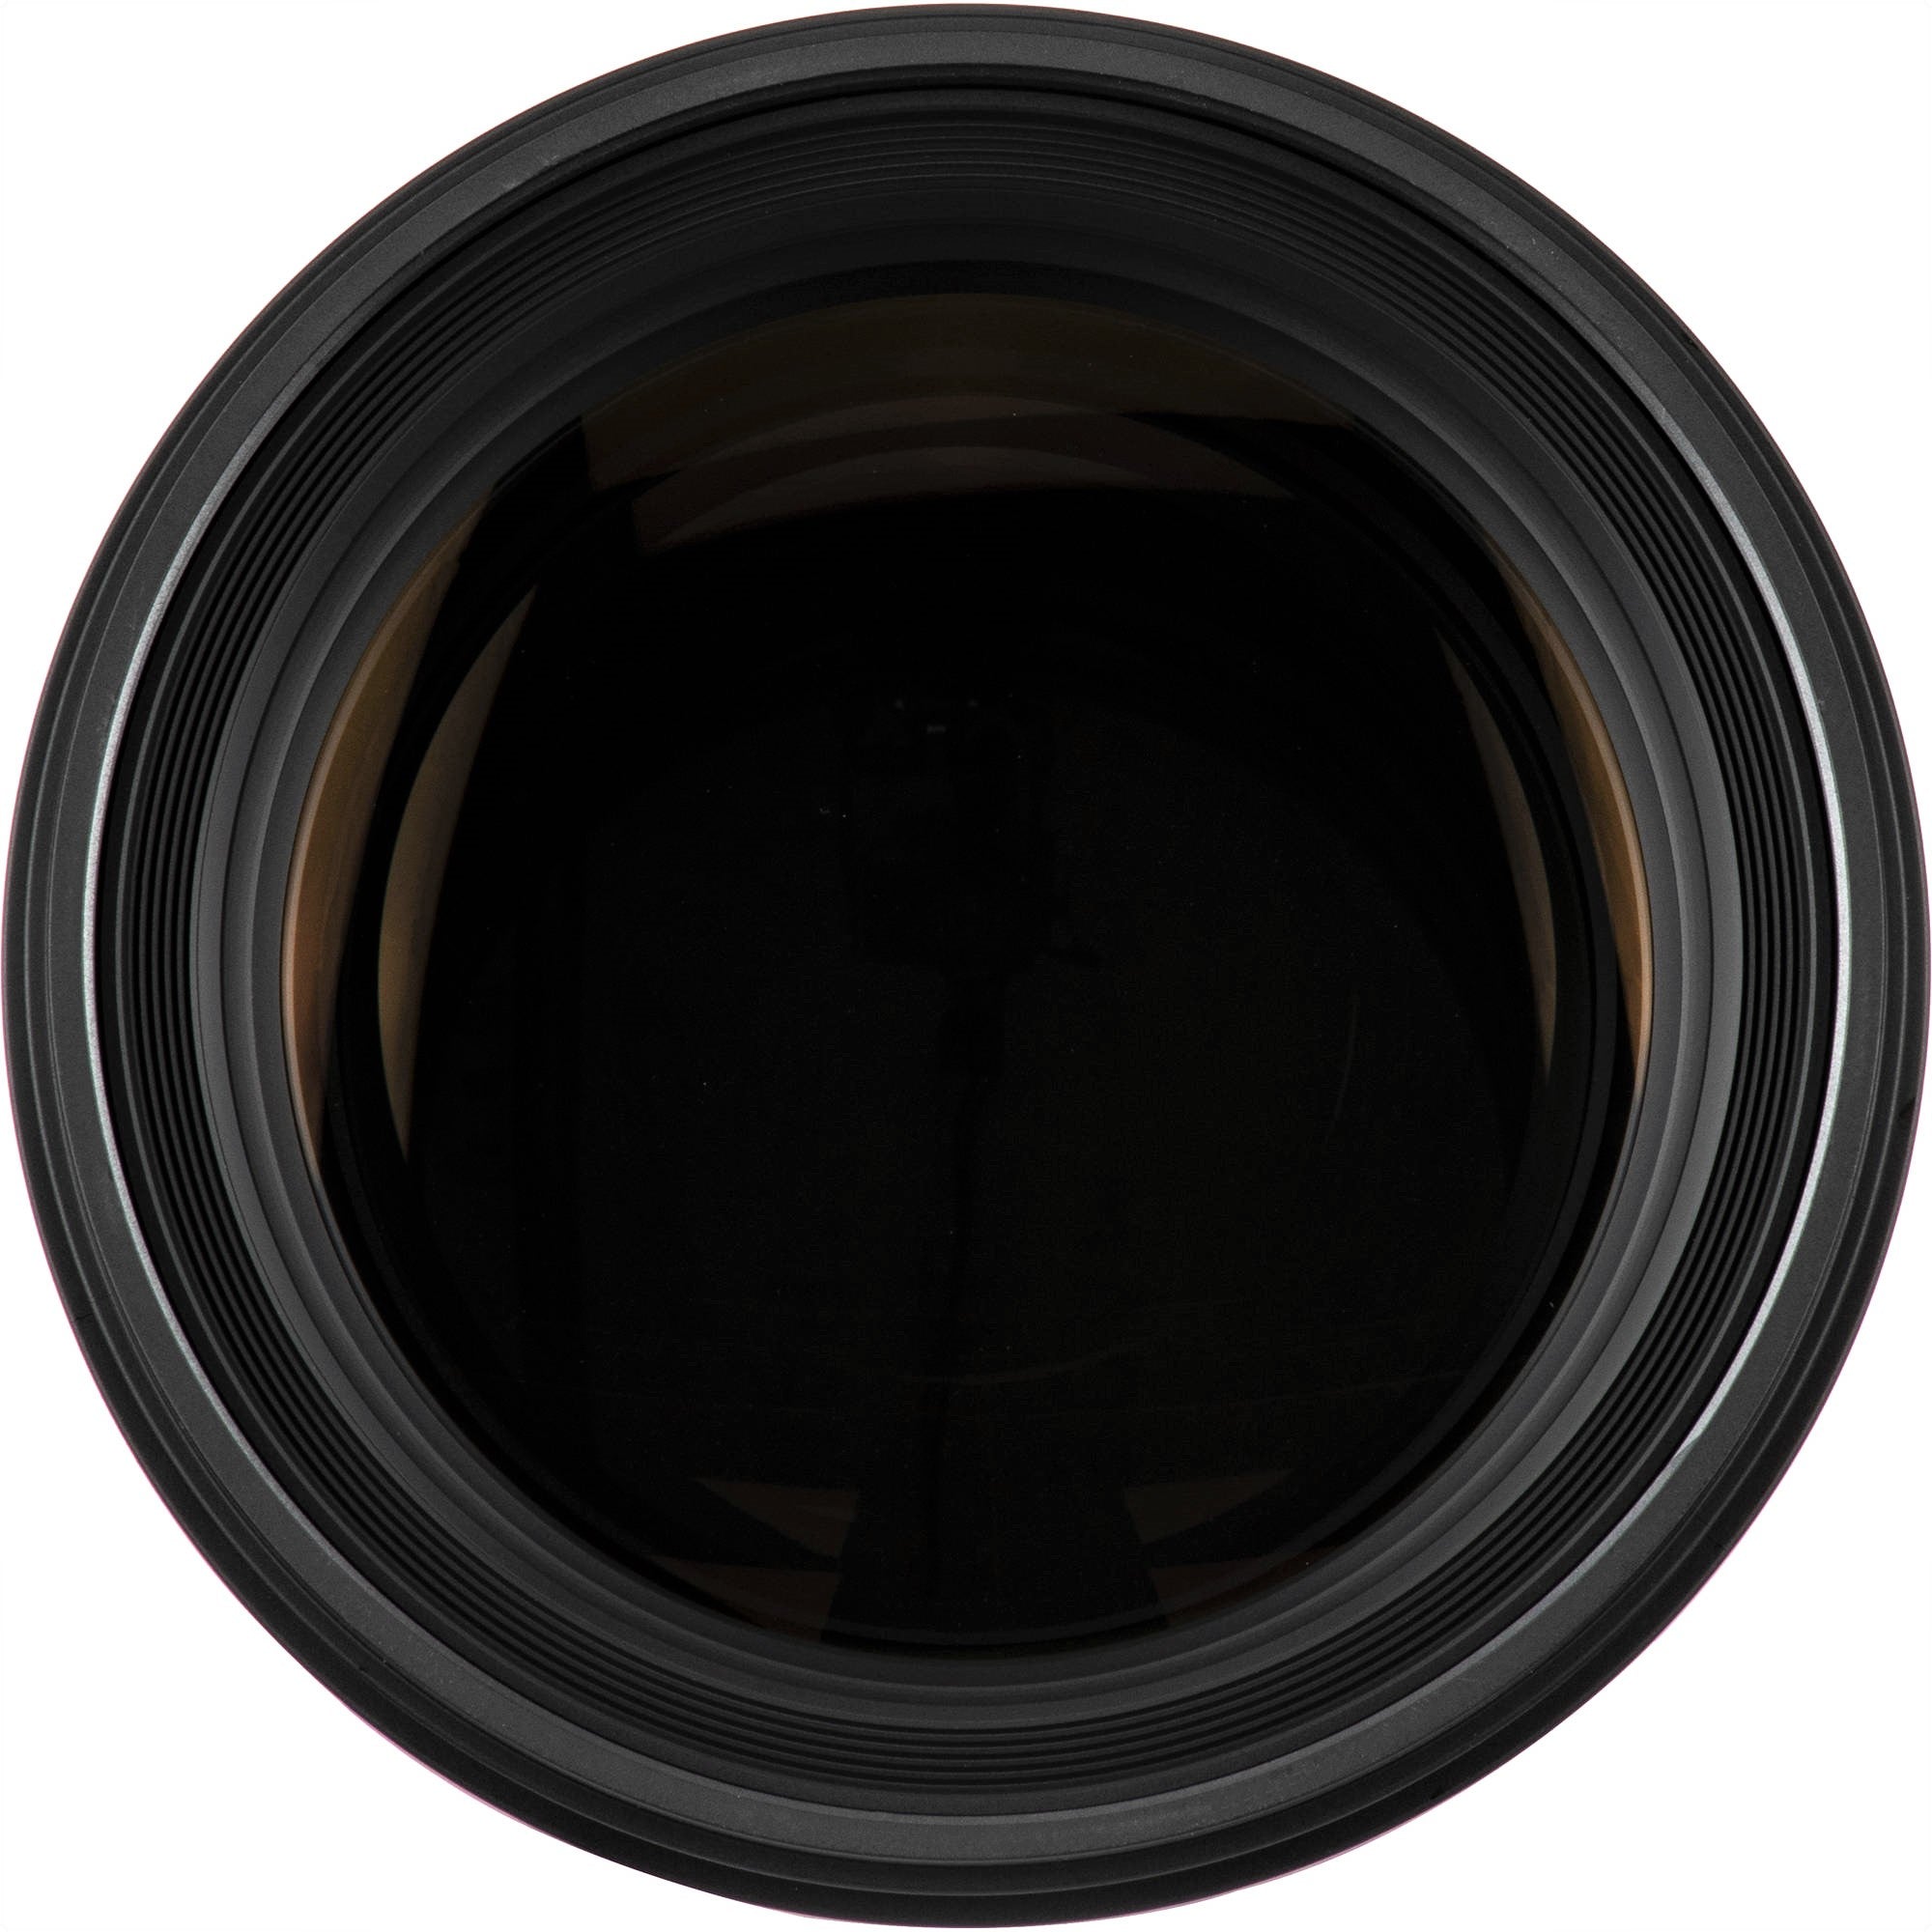 Sigma 105mm F1.4 DG HSM Art Lens for Leica L in a Front Close-Up View